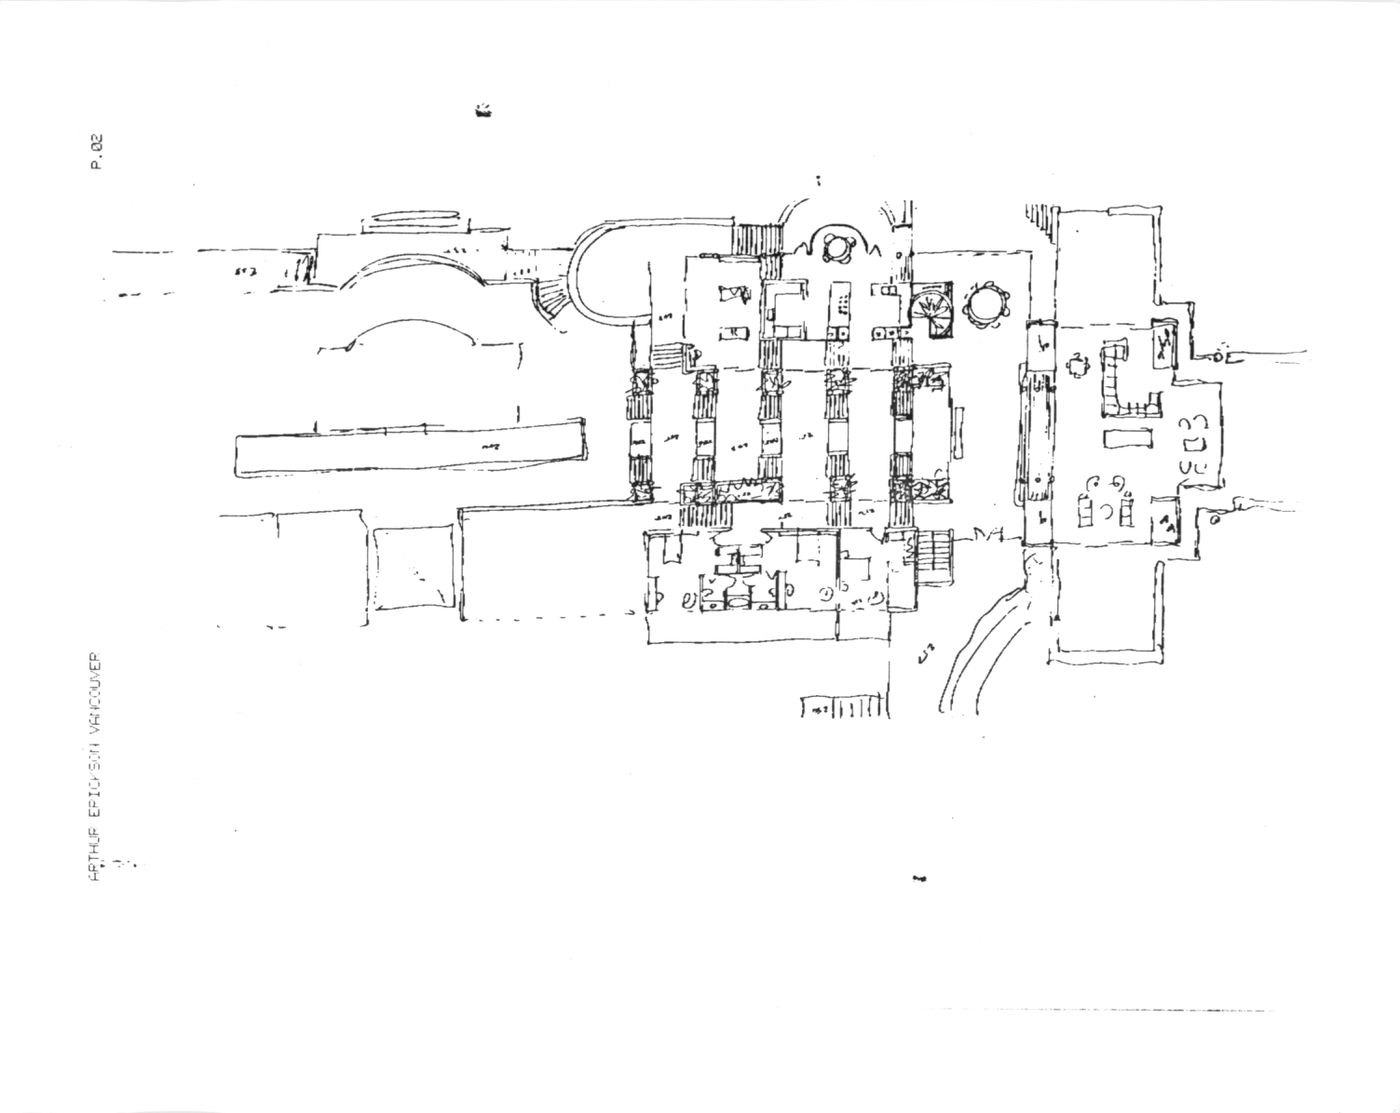 Ground floor study showing furniture layout and stair assemblies